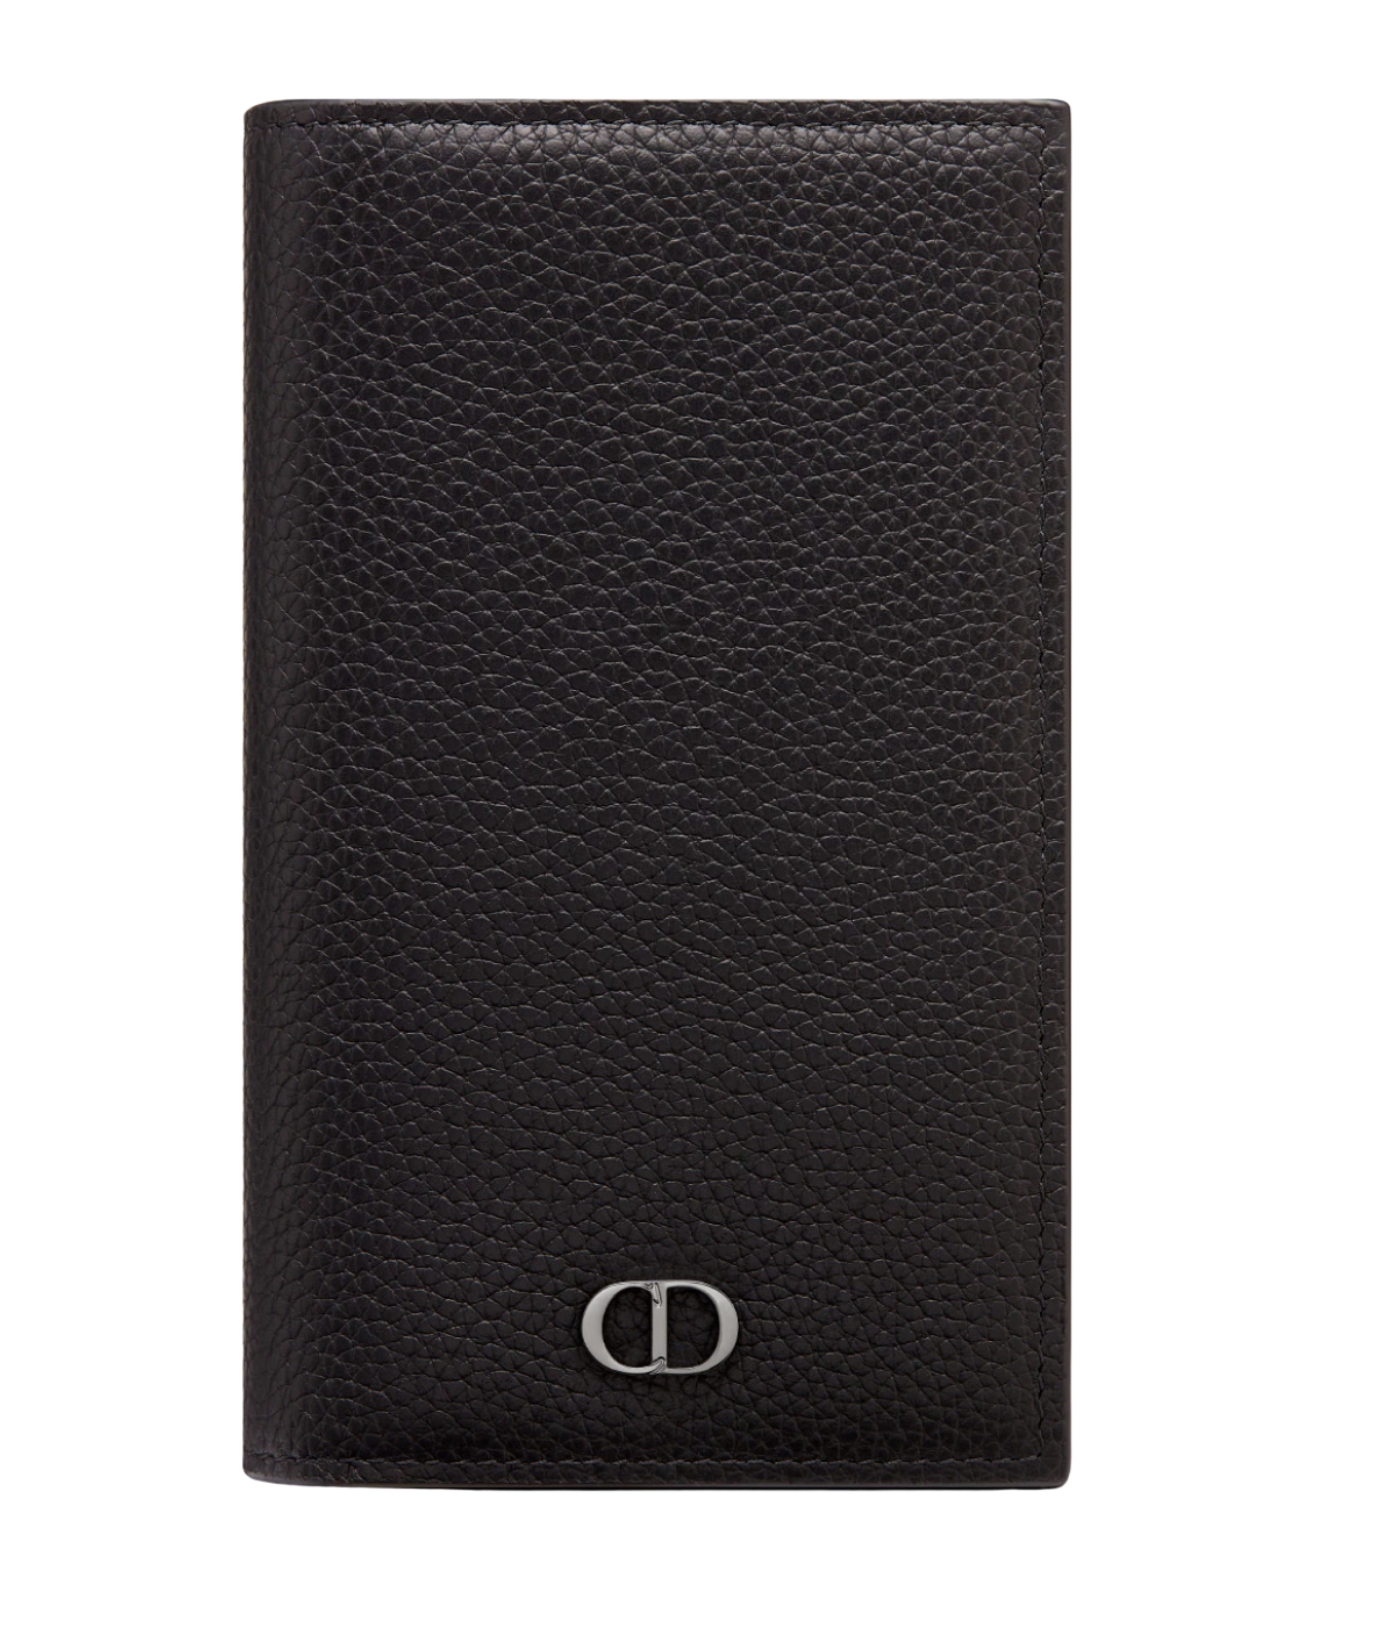 12-cool-gifts-for-him-this-fathers-day-dior-mens-wallet